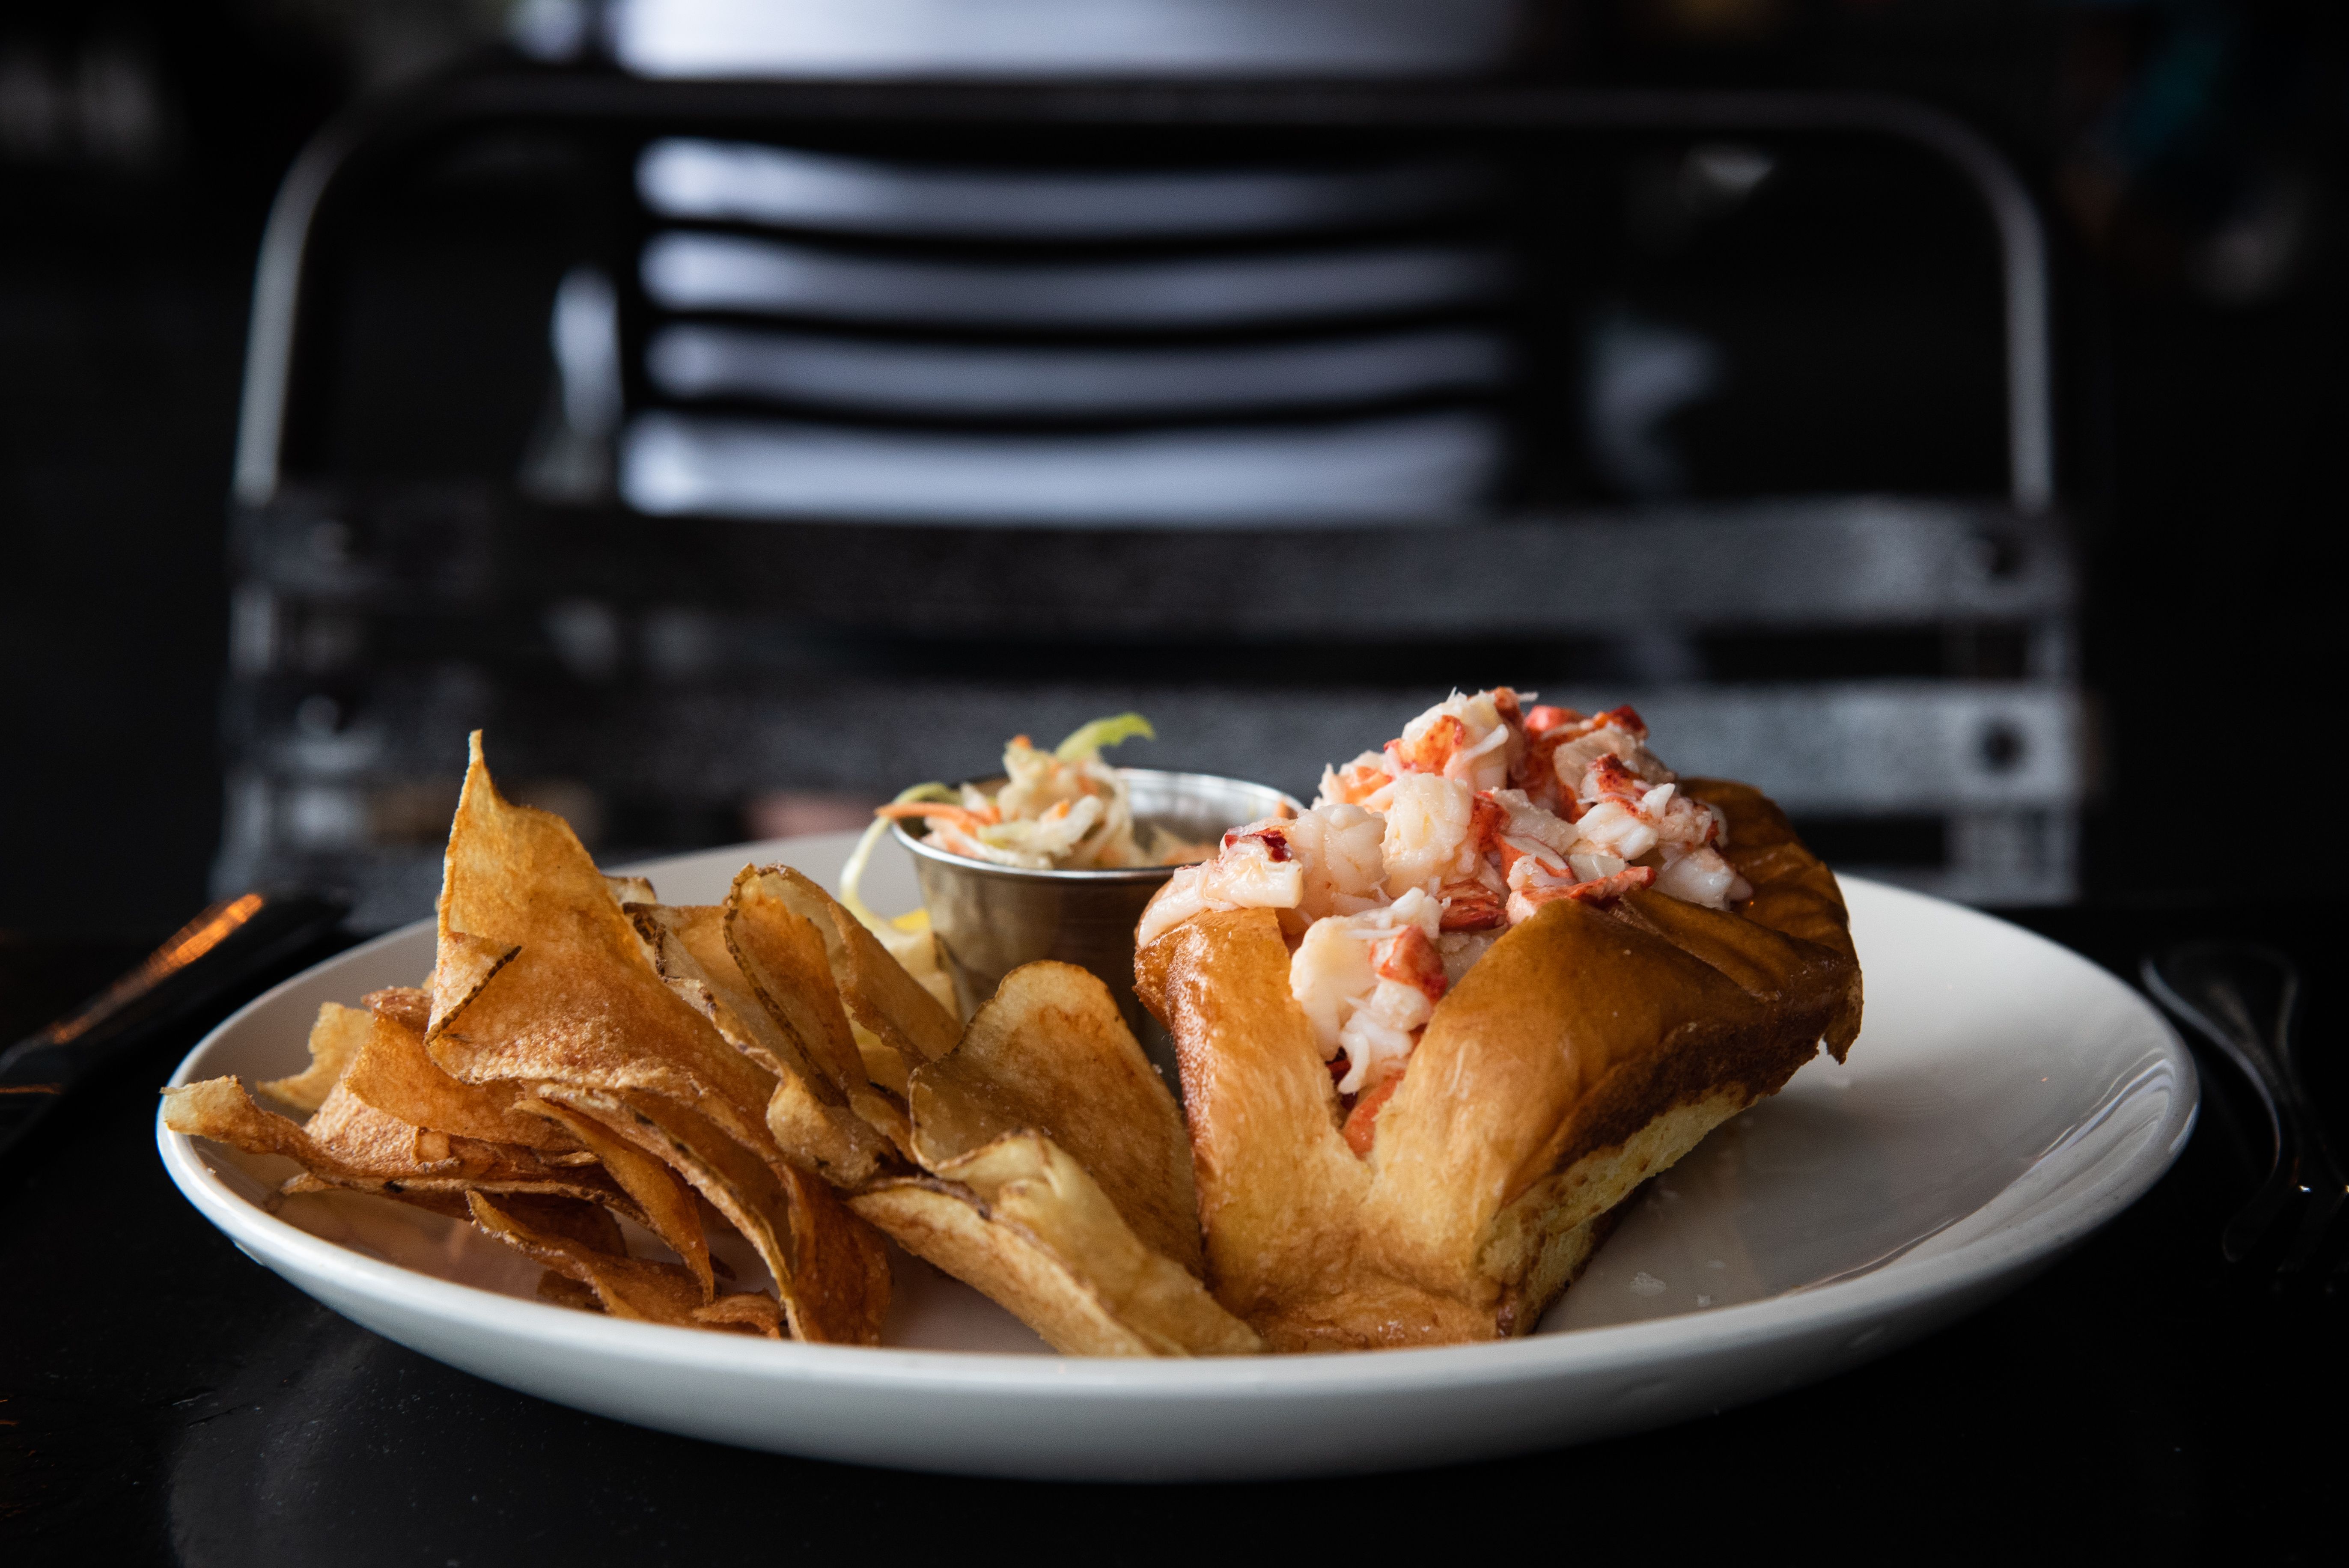 A lobster roll with a side of chips sits on a white plate on a black table